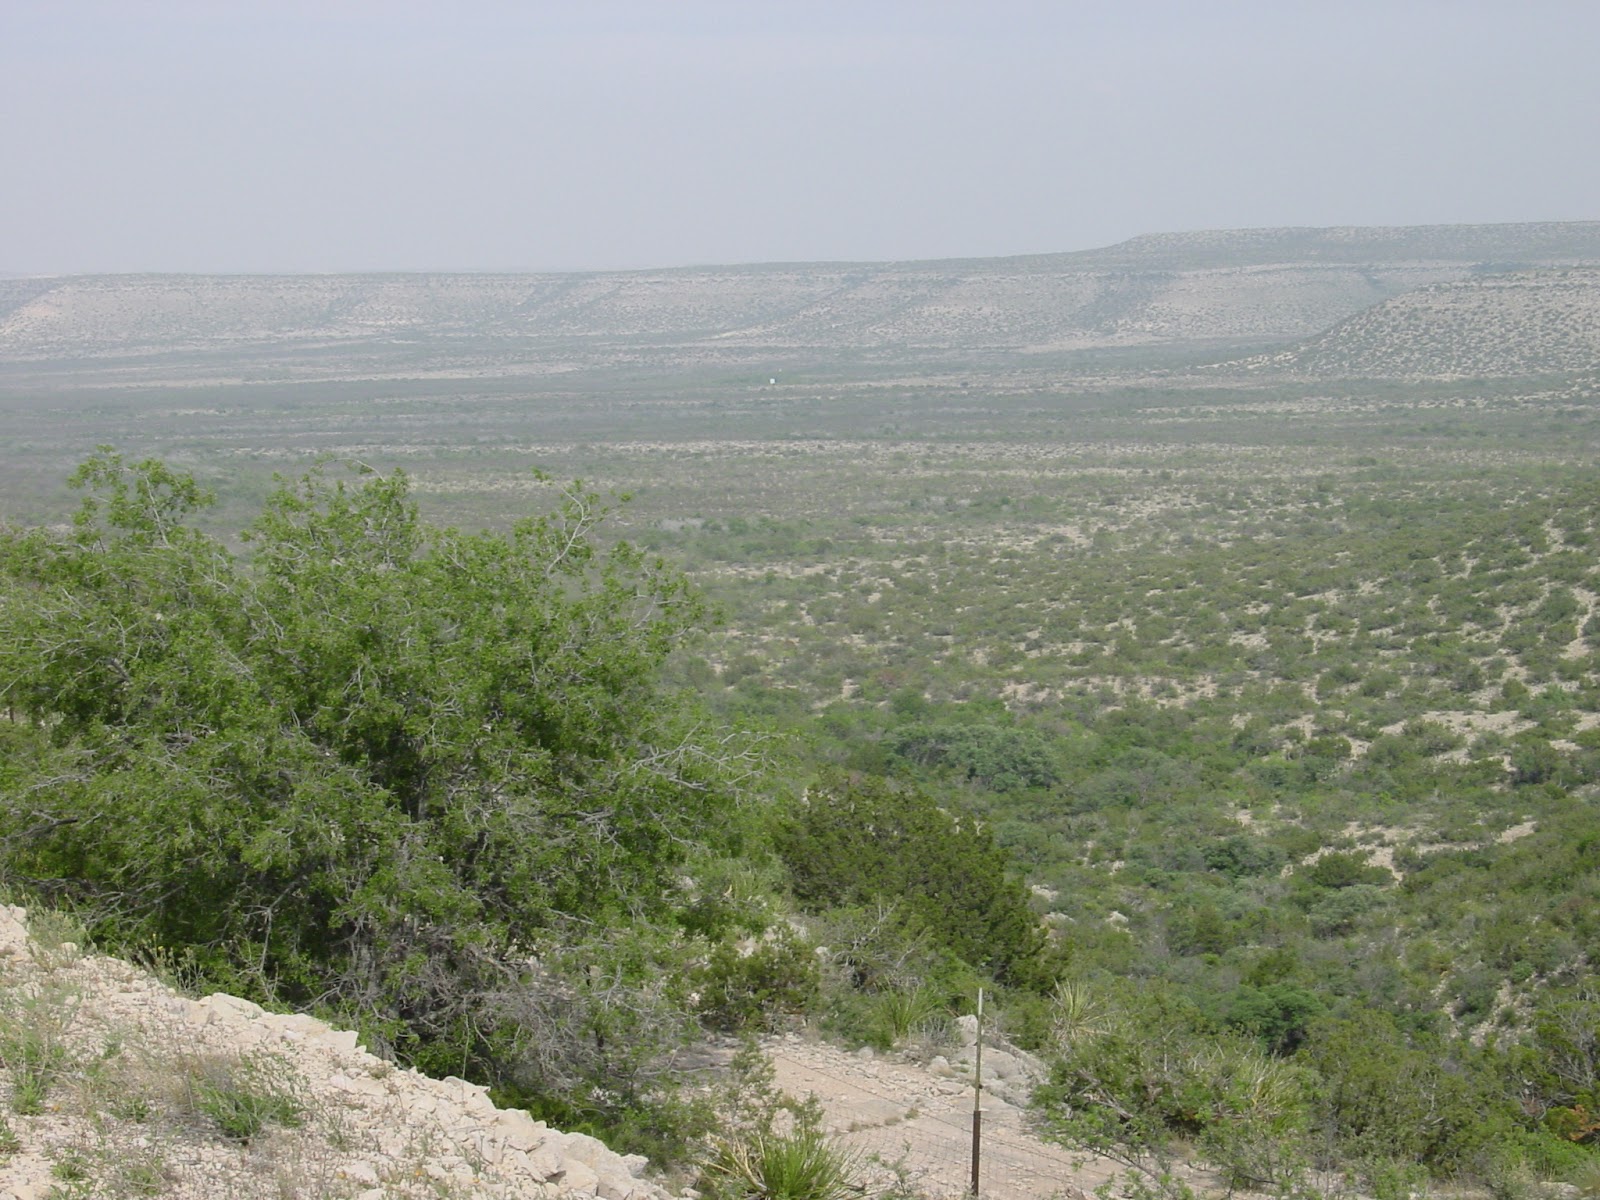 An open desert valley with some dull green shrubs and distant mesas.